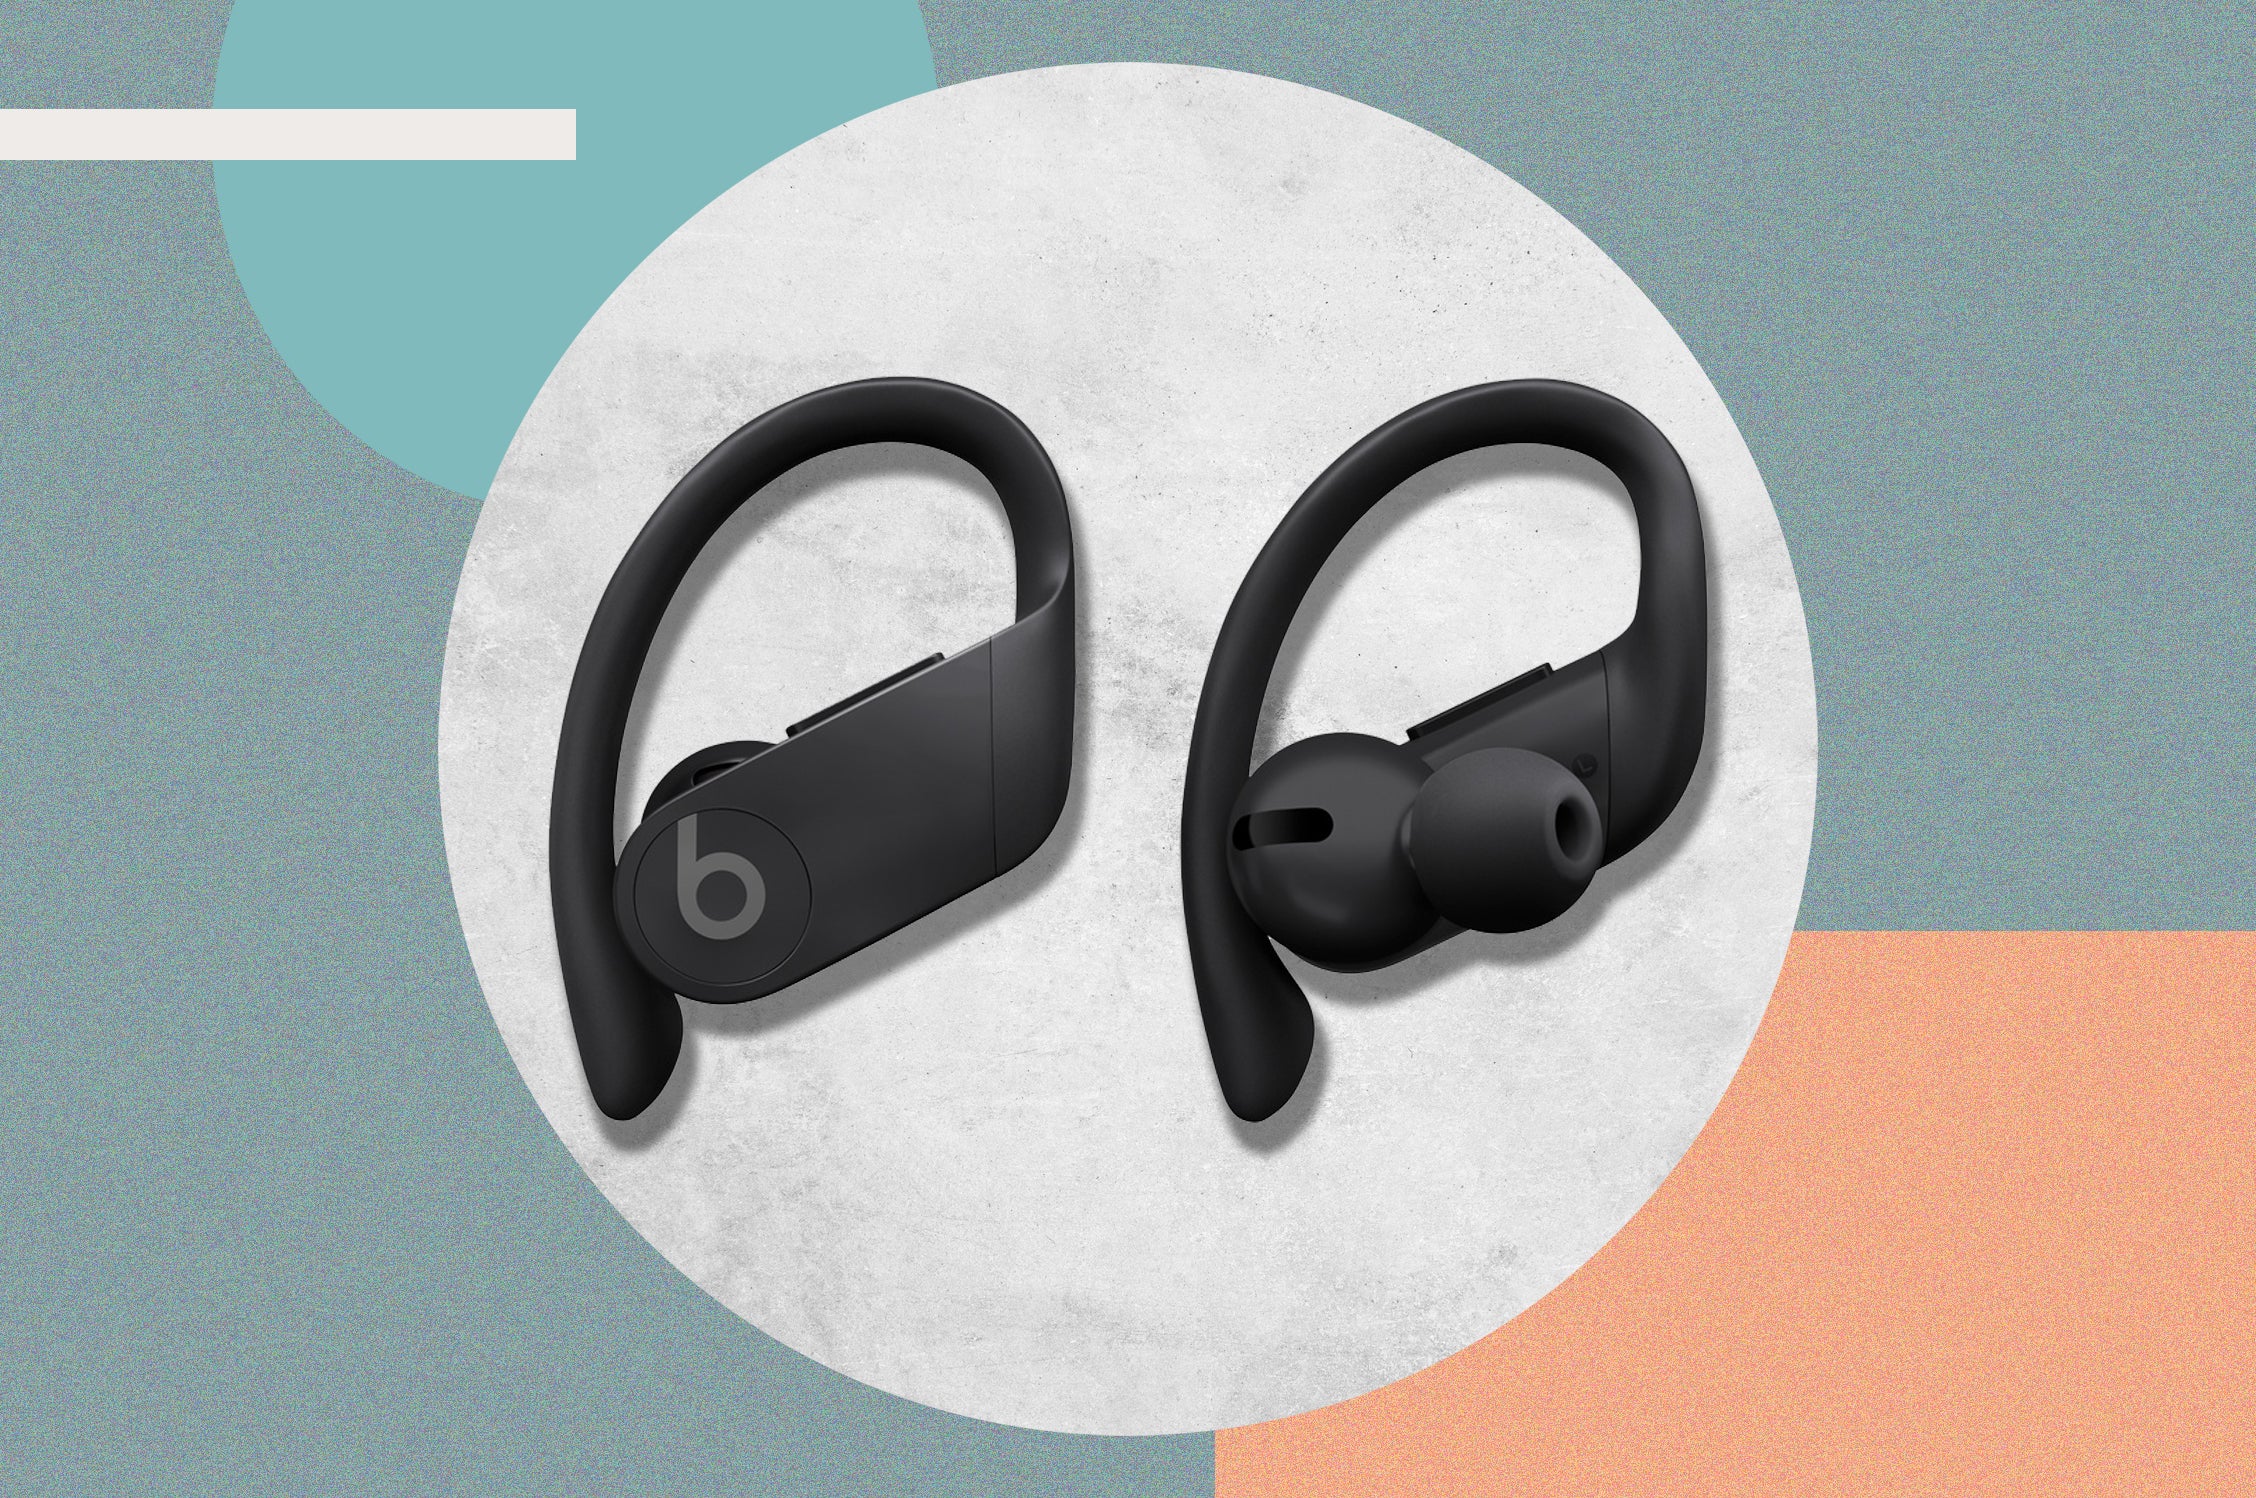 Beats Powerbeats pro review: The Apple earbuds for running and workouts | The Independent